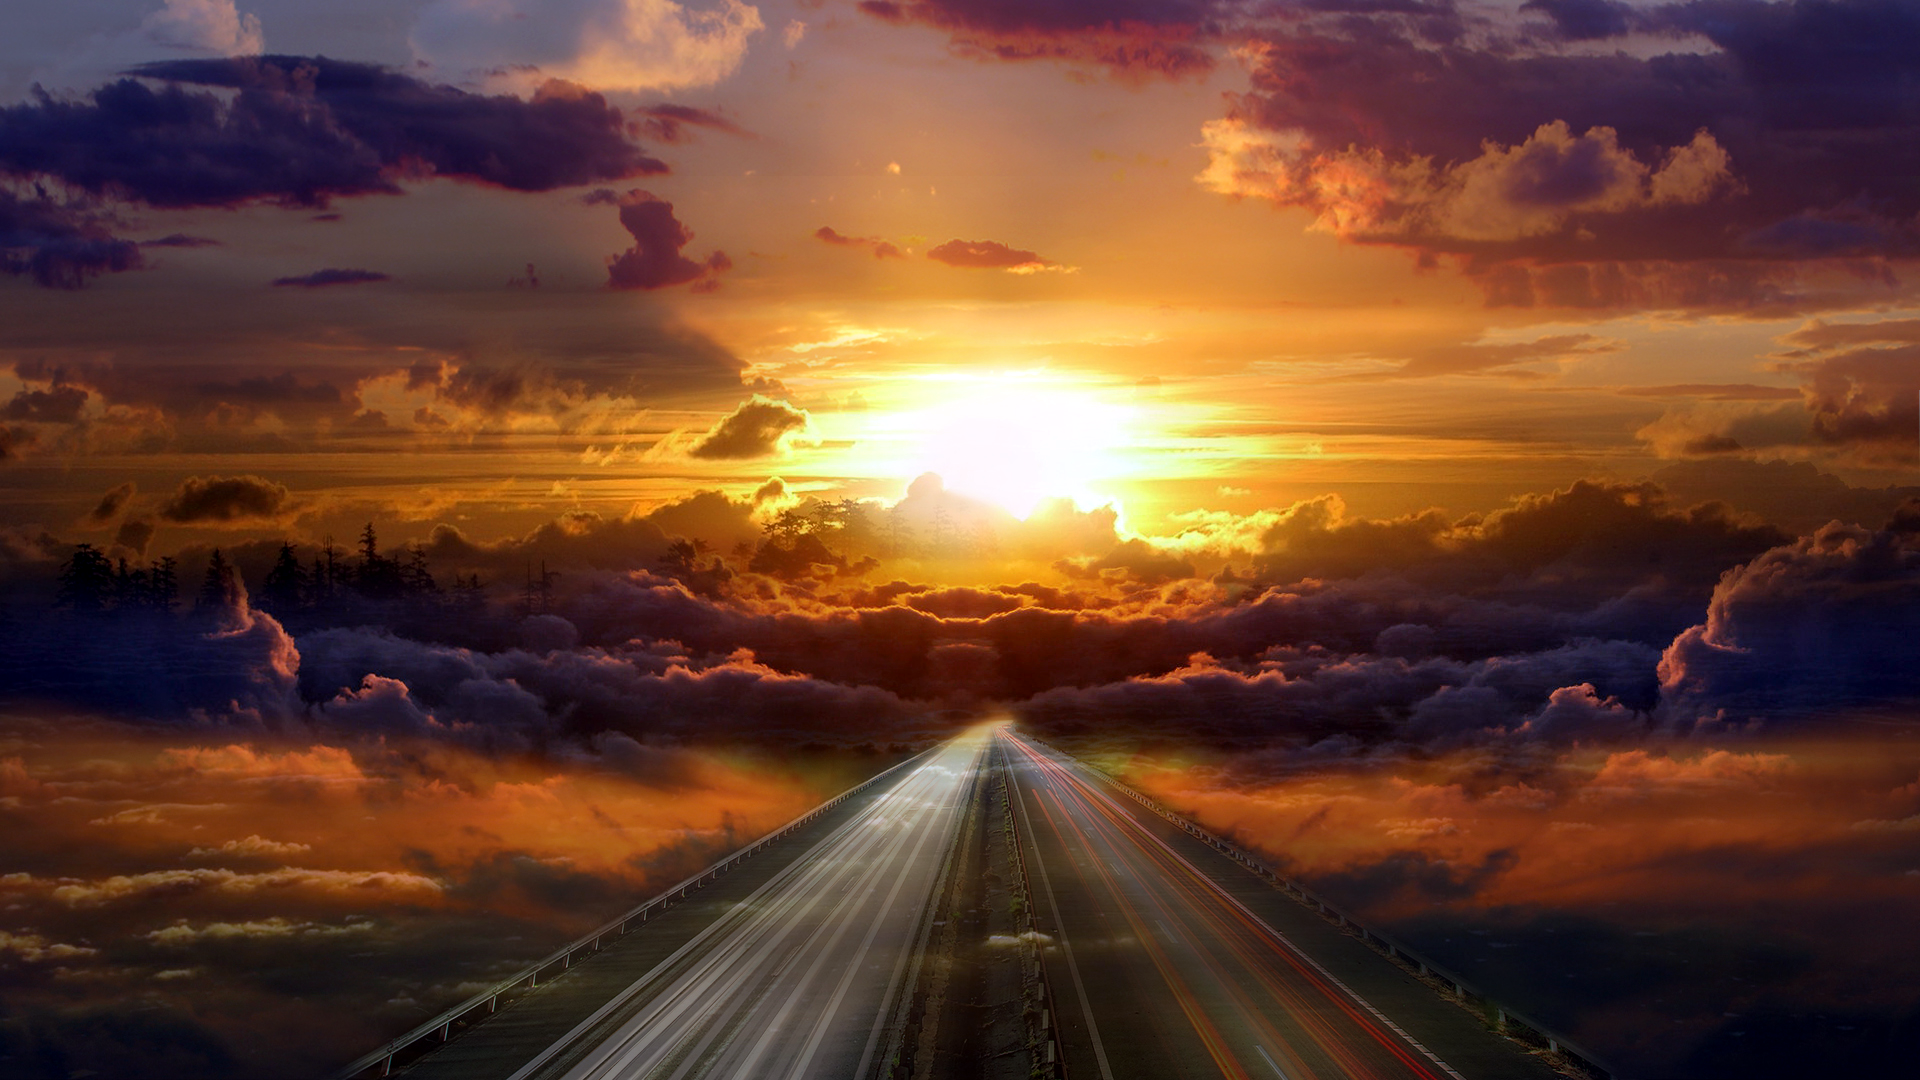 Highway surrounded by clouds wallpaper 19279 1920x1080